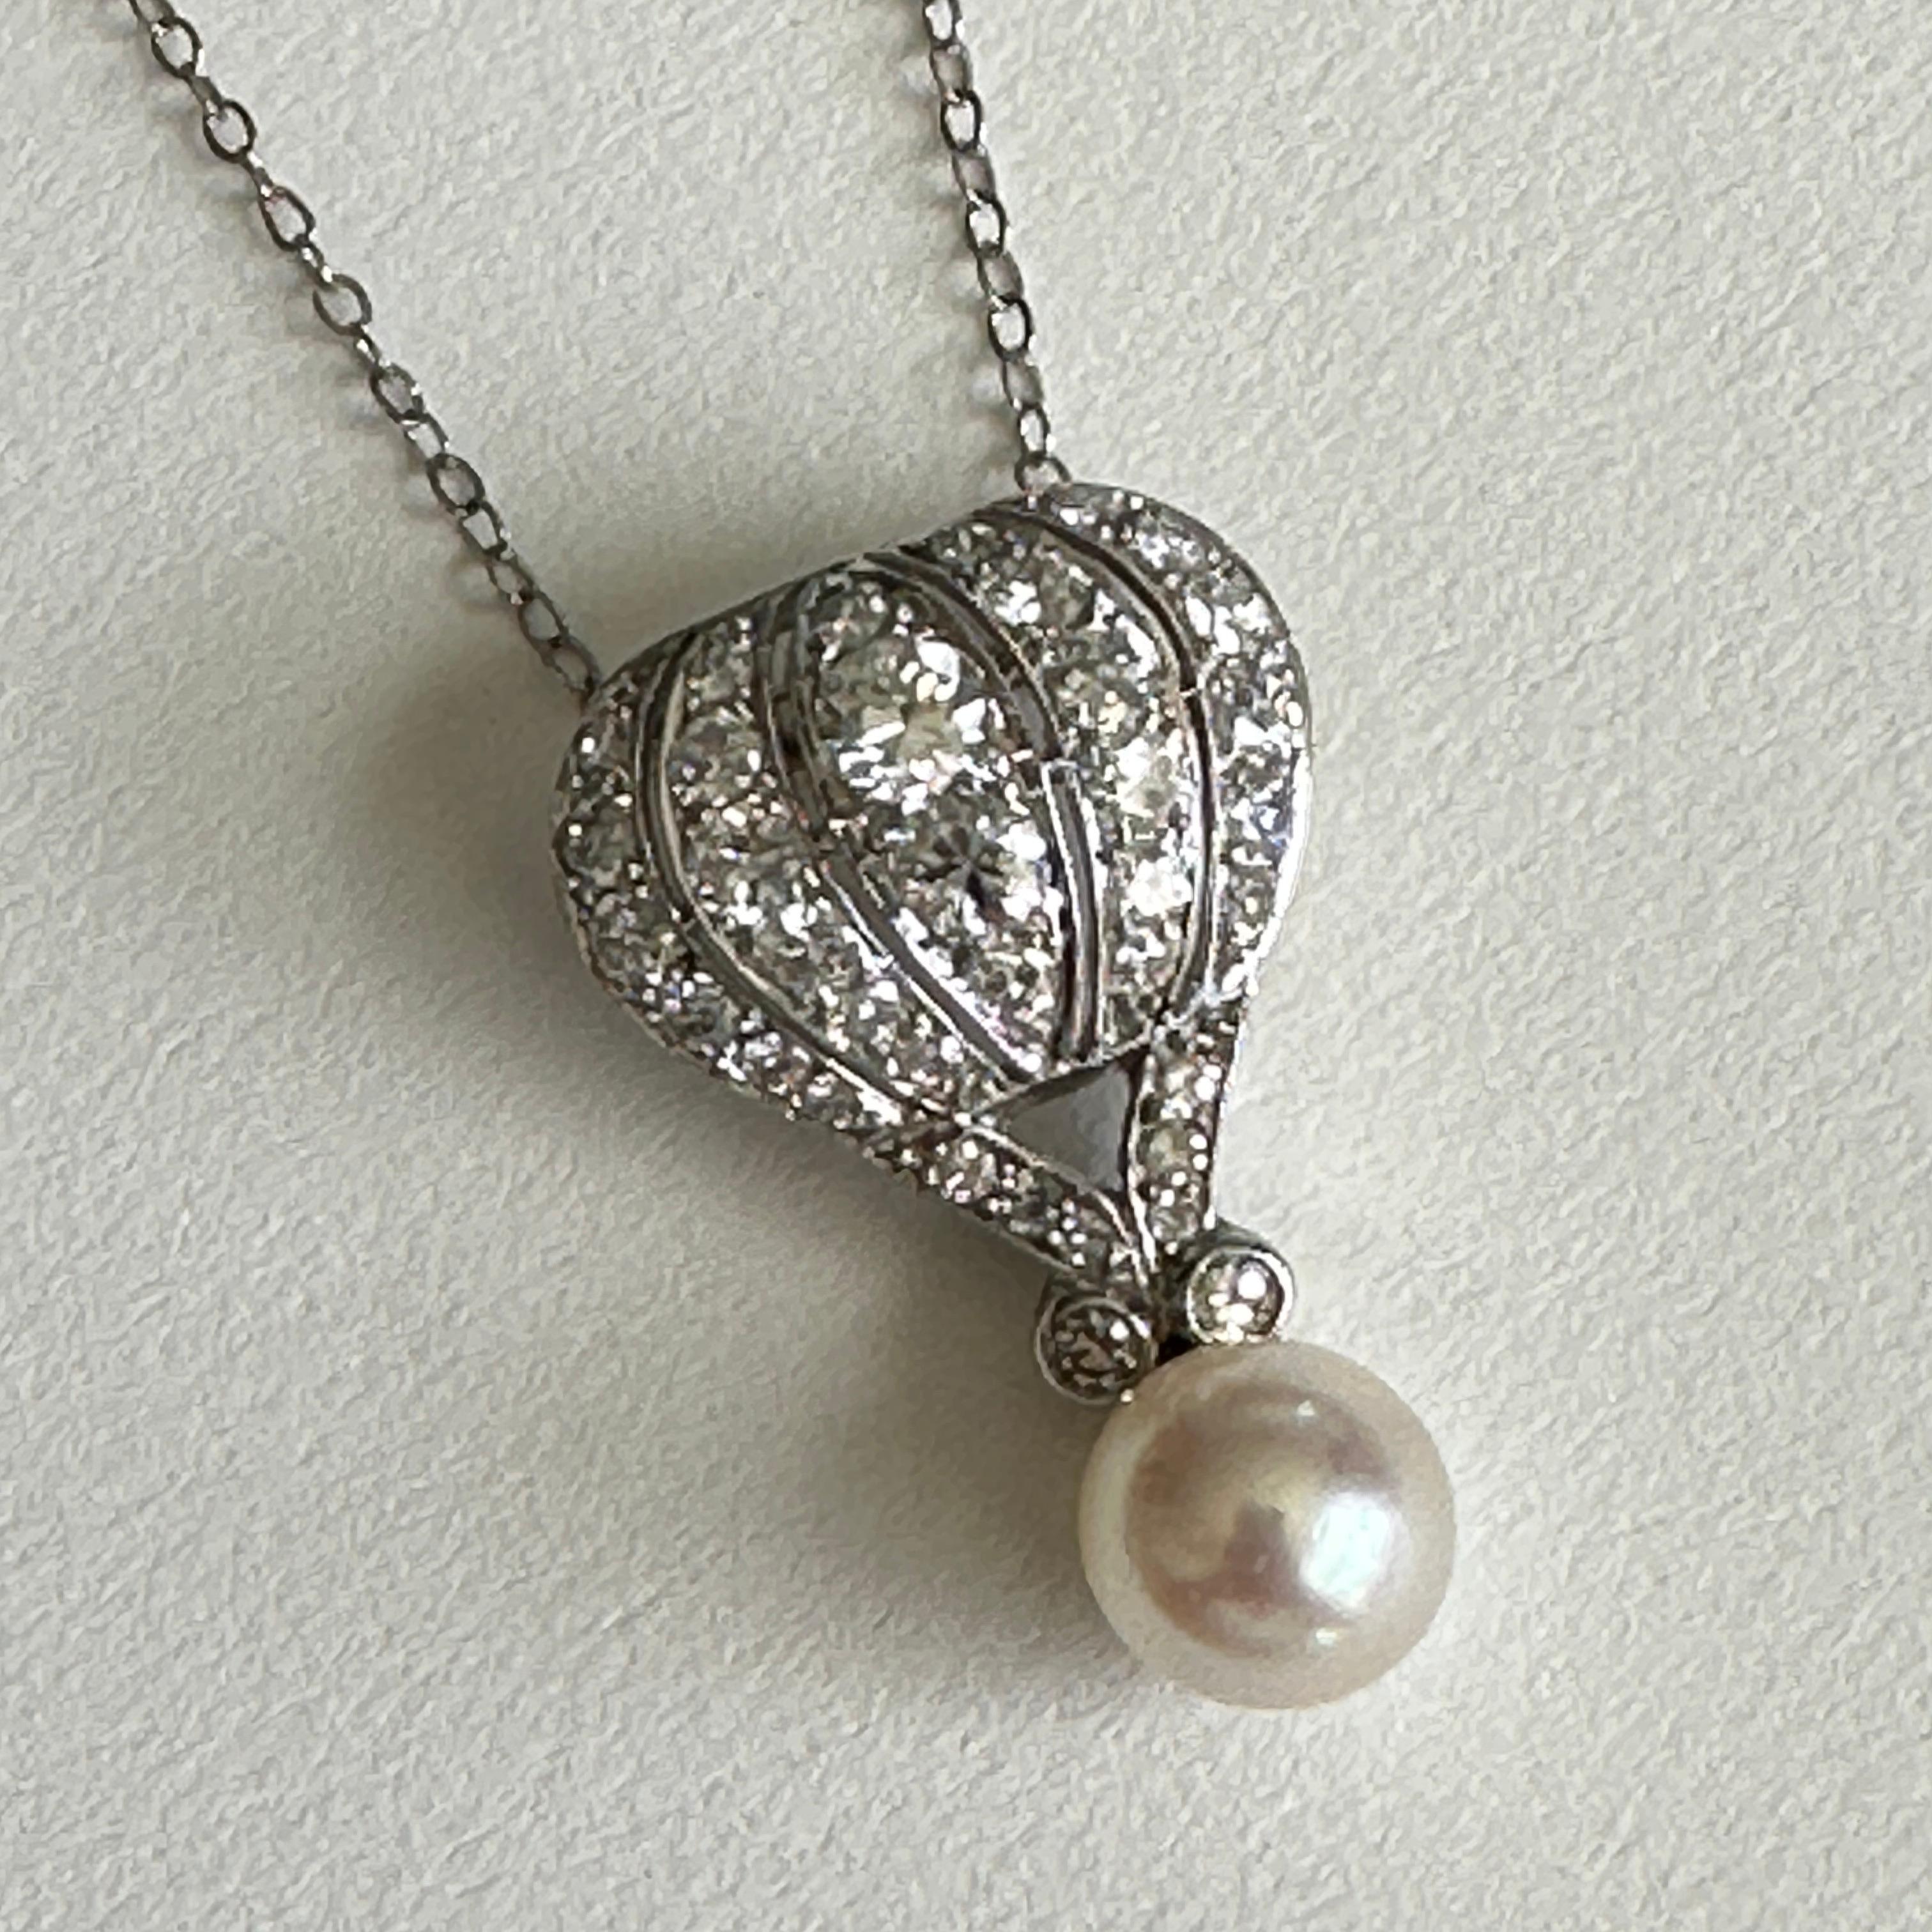 Details:
The sweetest hot air balloon pendant in white 14K gold, with a pearl basket! A mid-century vintage piece likely from the 1940's-1950's. The balloon is encrusted with diamonds. This piece is very sweet and would be a great addition to your